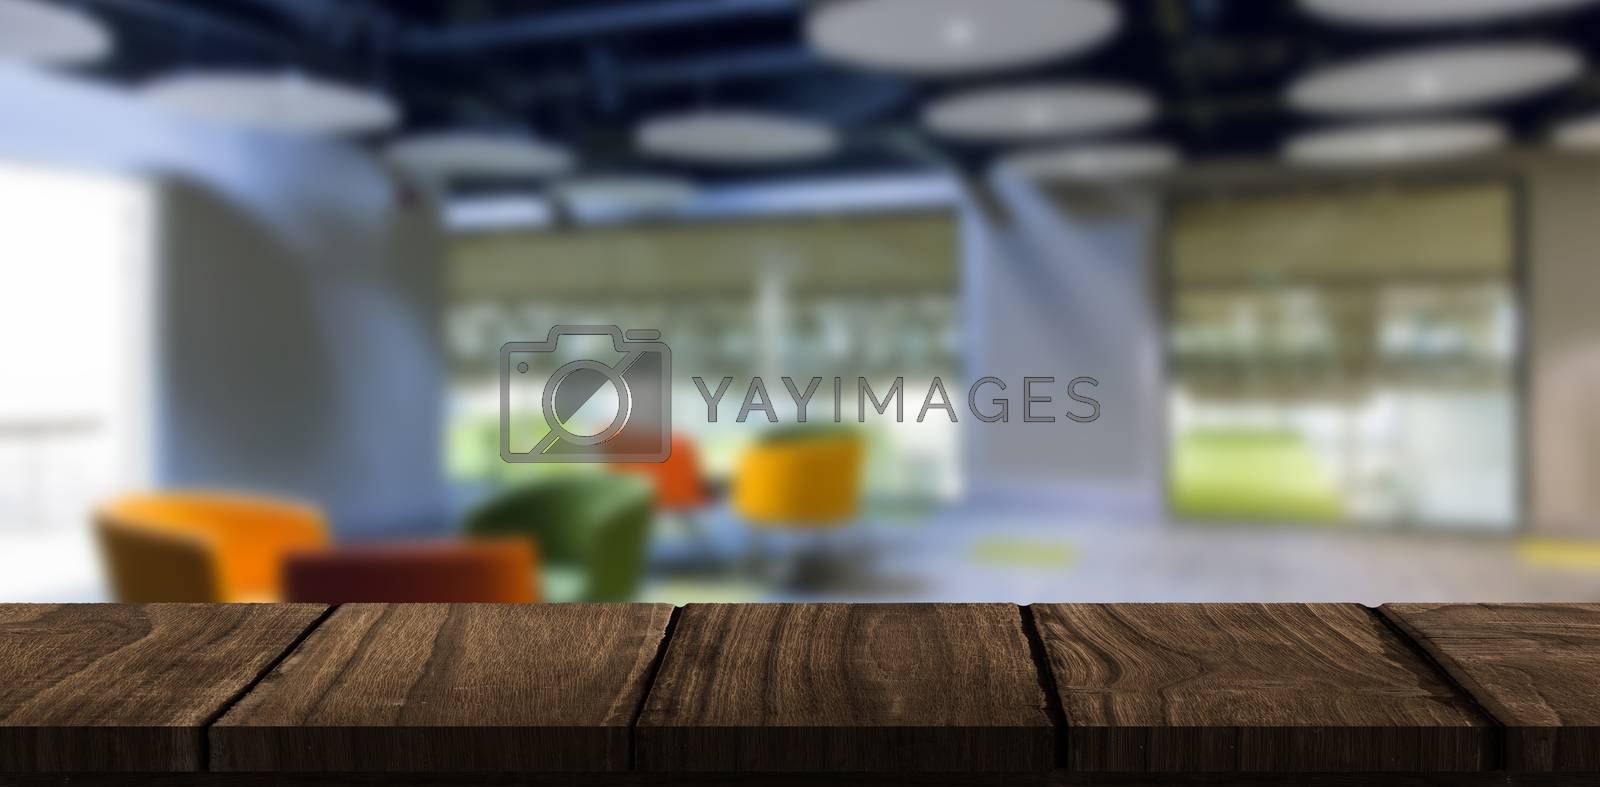 Royalty free image of Composite image of wooden desk by Wavebreakmedia